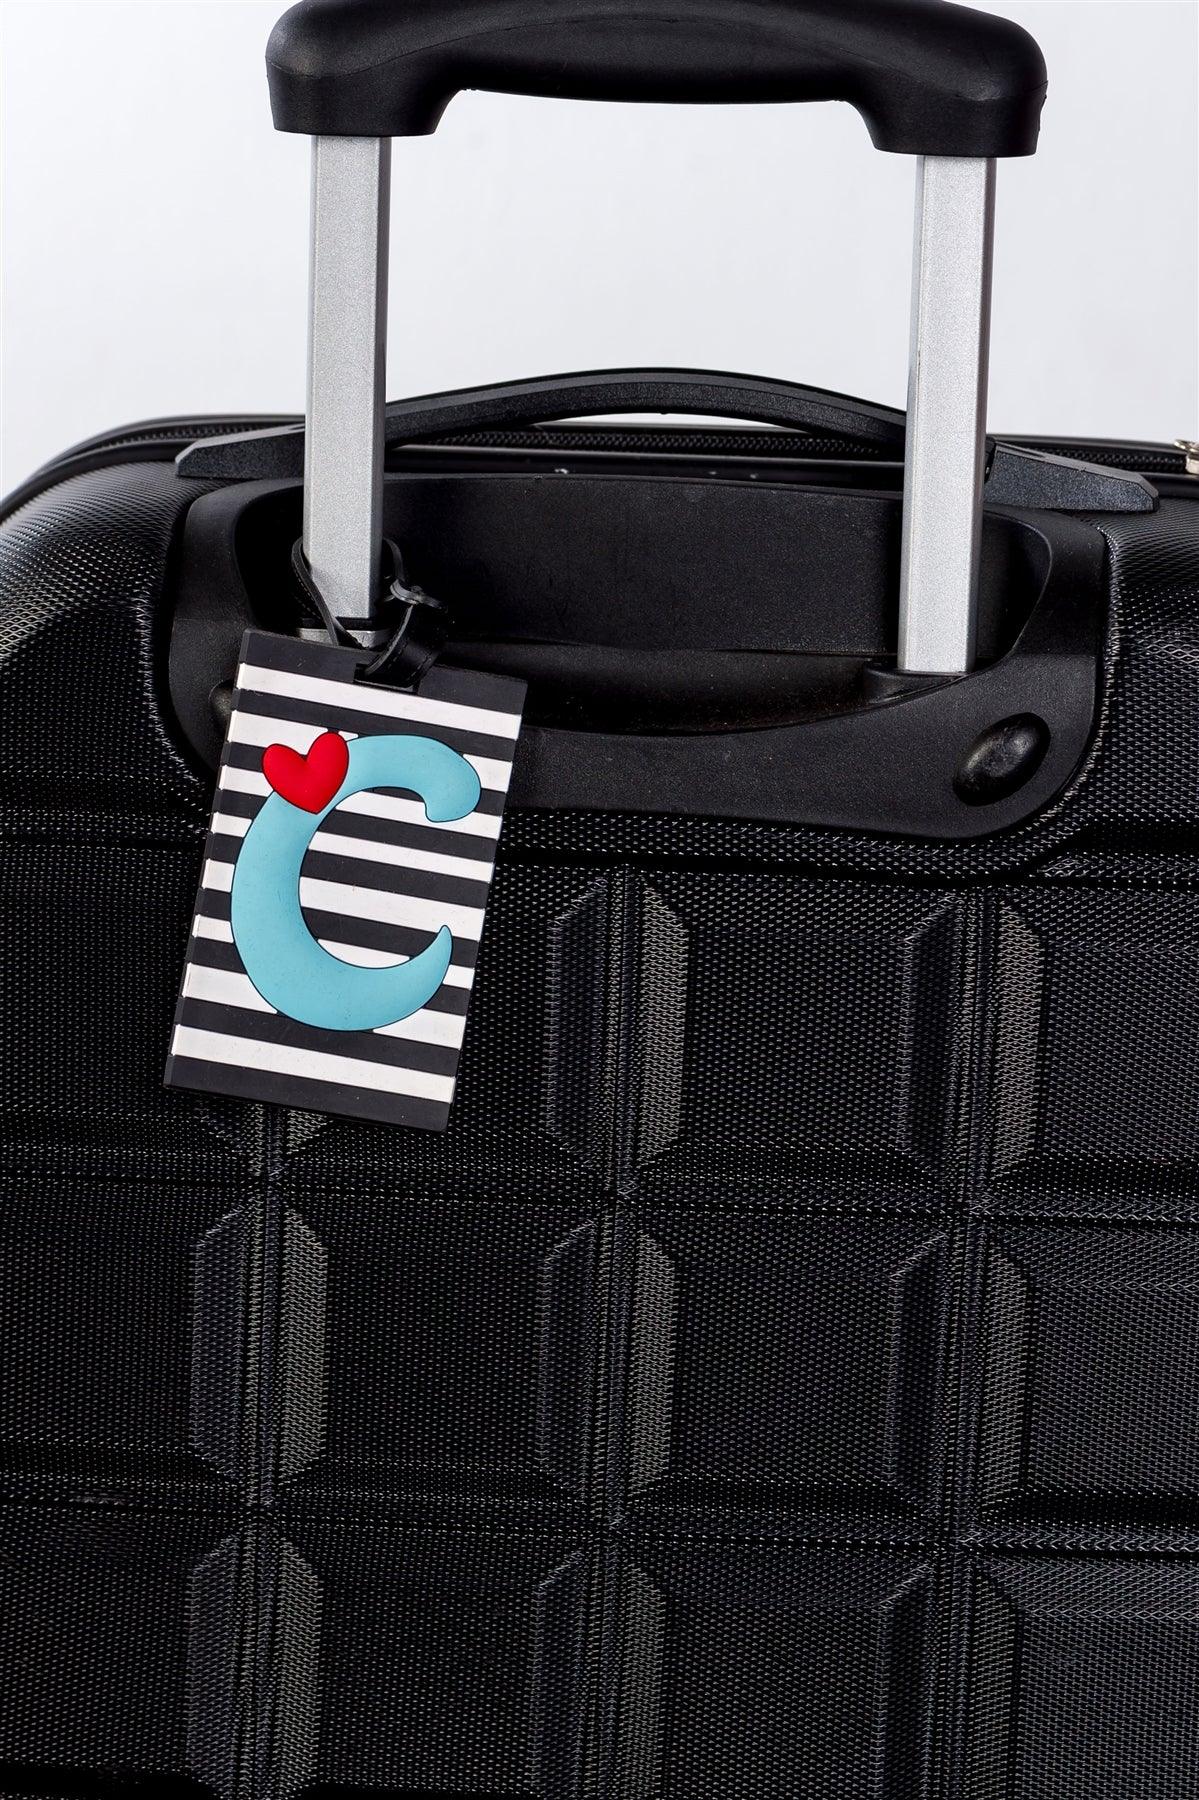 Stripe Luggage Tag Initial Letter "C" / 3 pieces